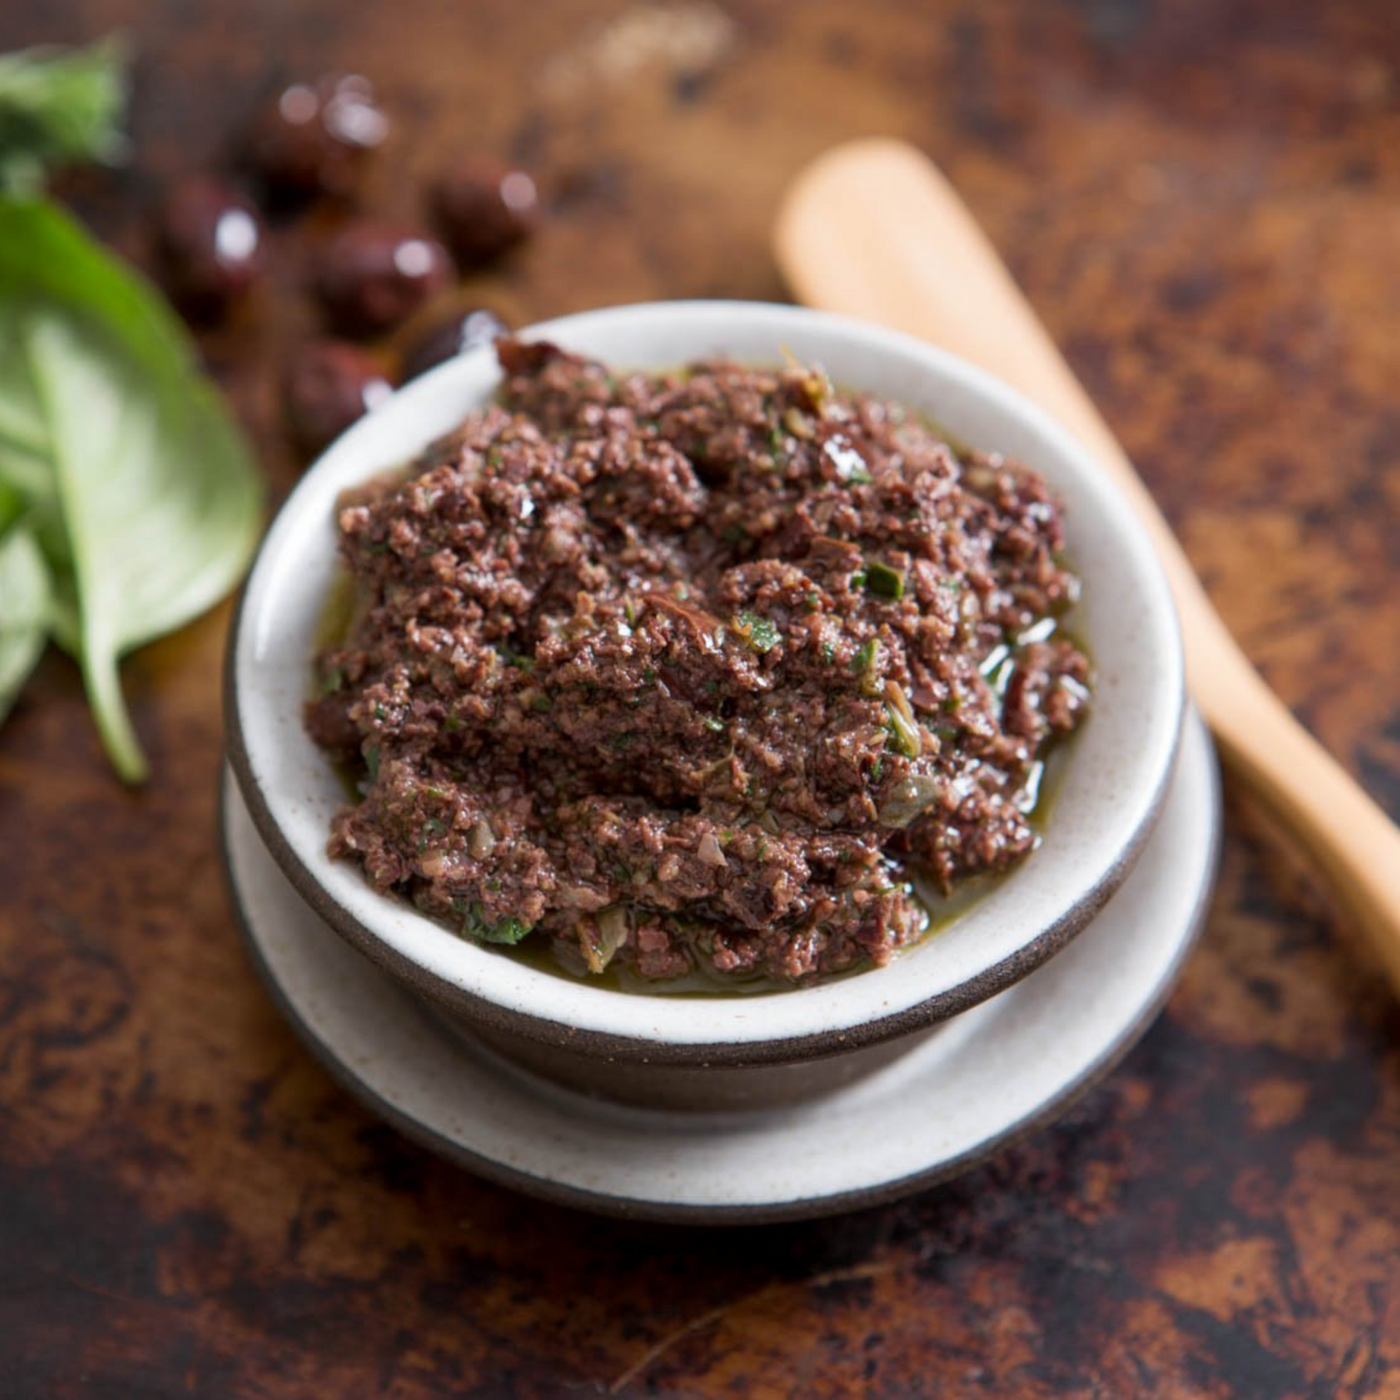 Tapenade is a Provençal name for a dish consisting of puréed or finely chopped olives, capers.